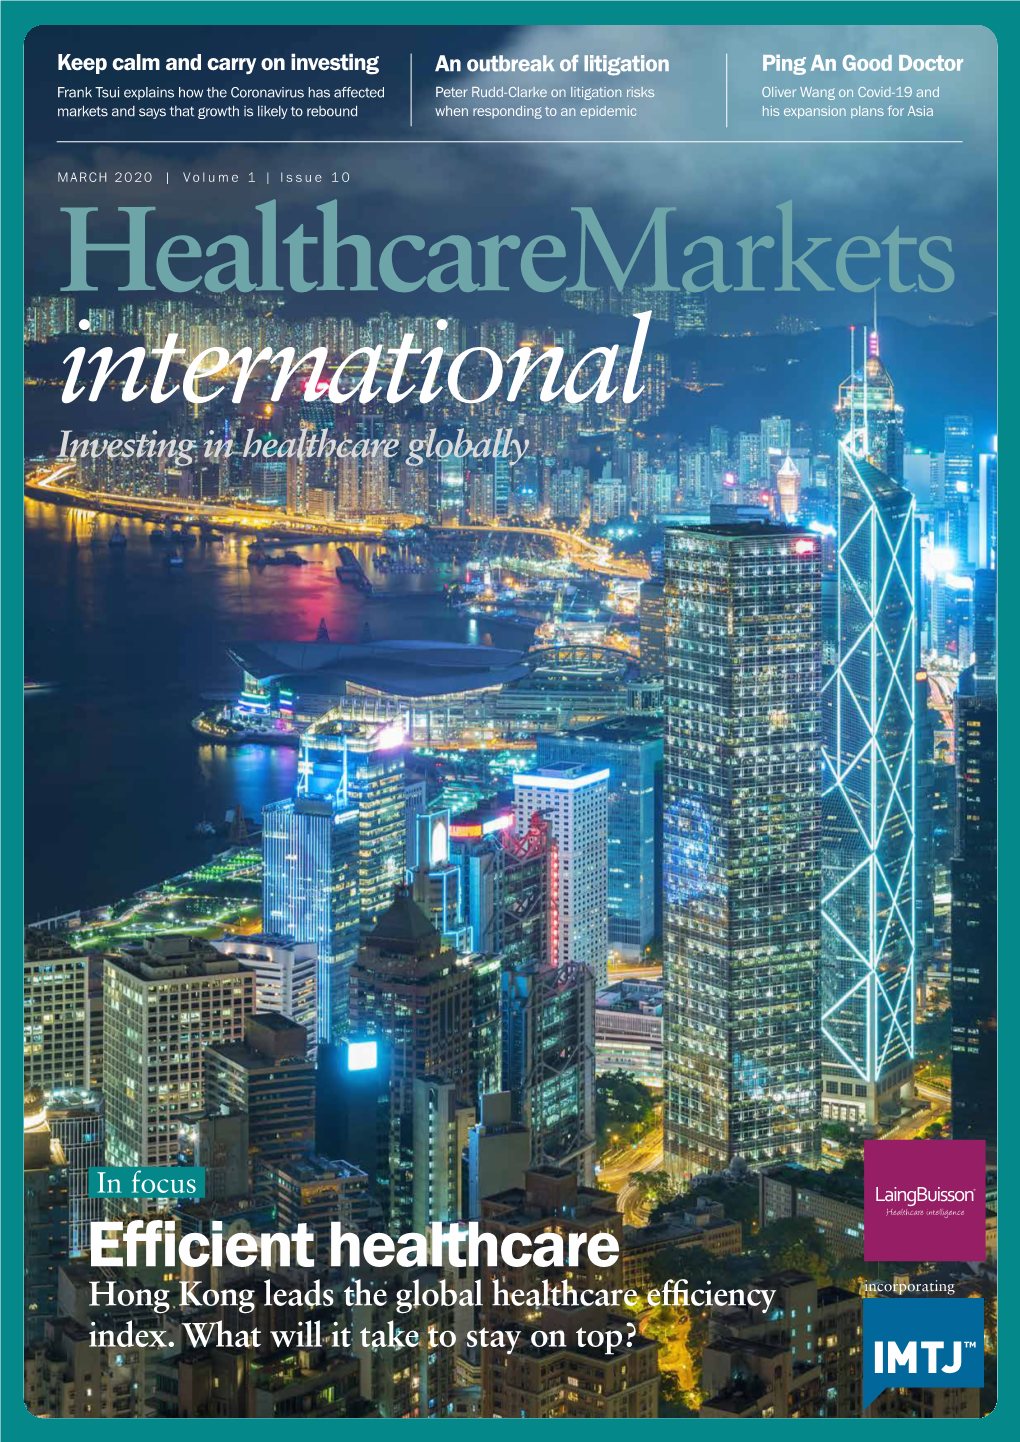 Efficient Healthcare Hong Kong Leads the Global Healthcare Efficiency Incorporating